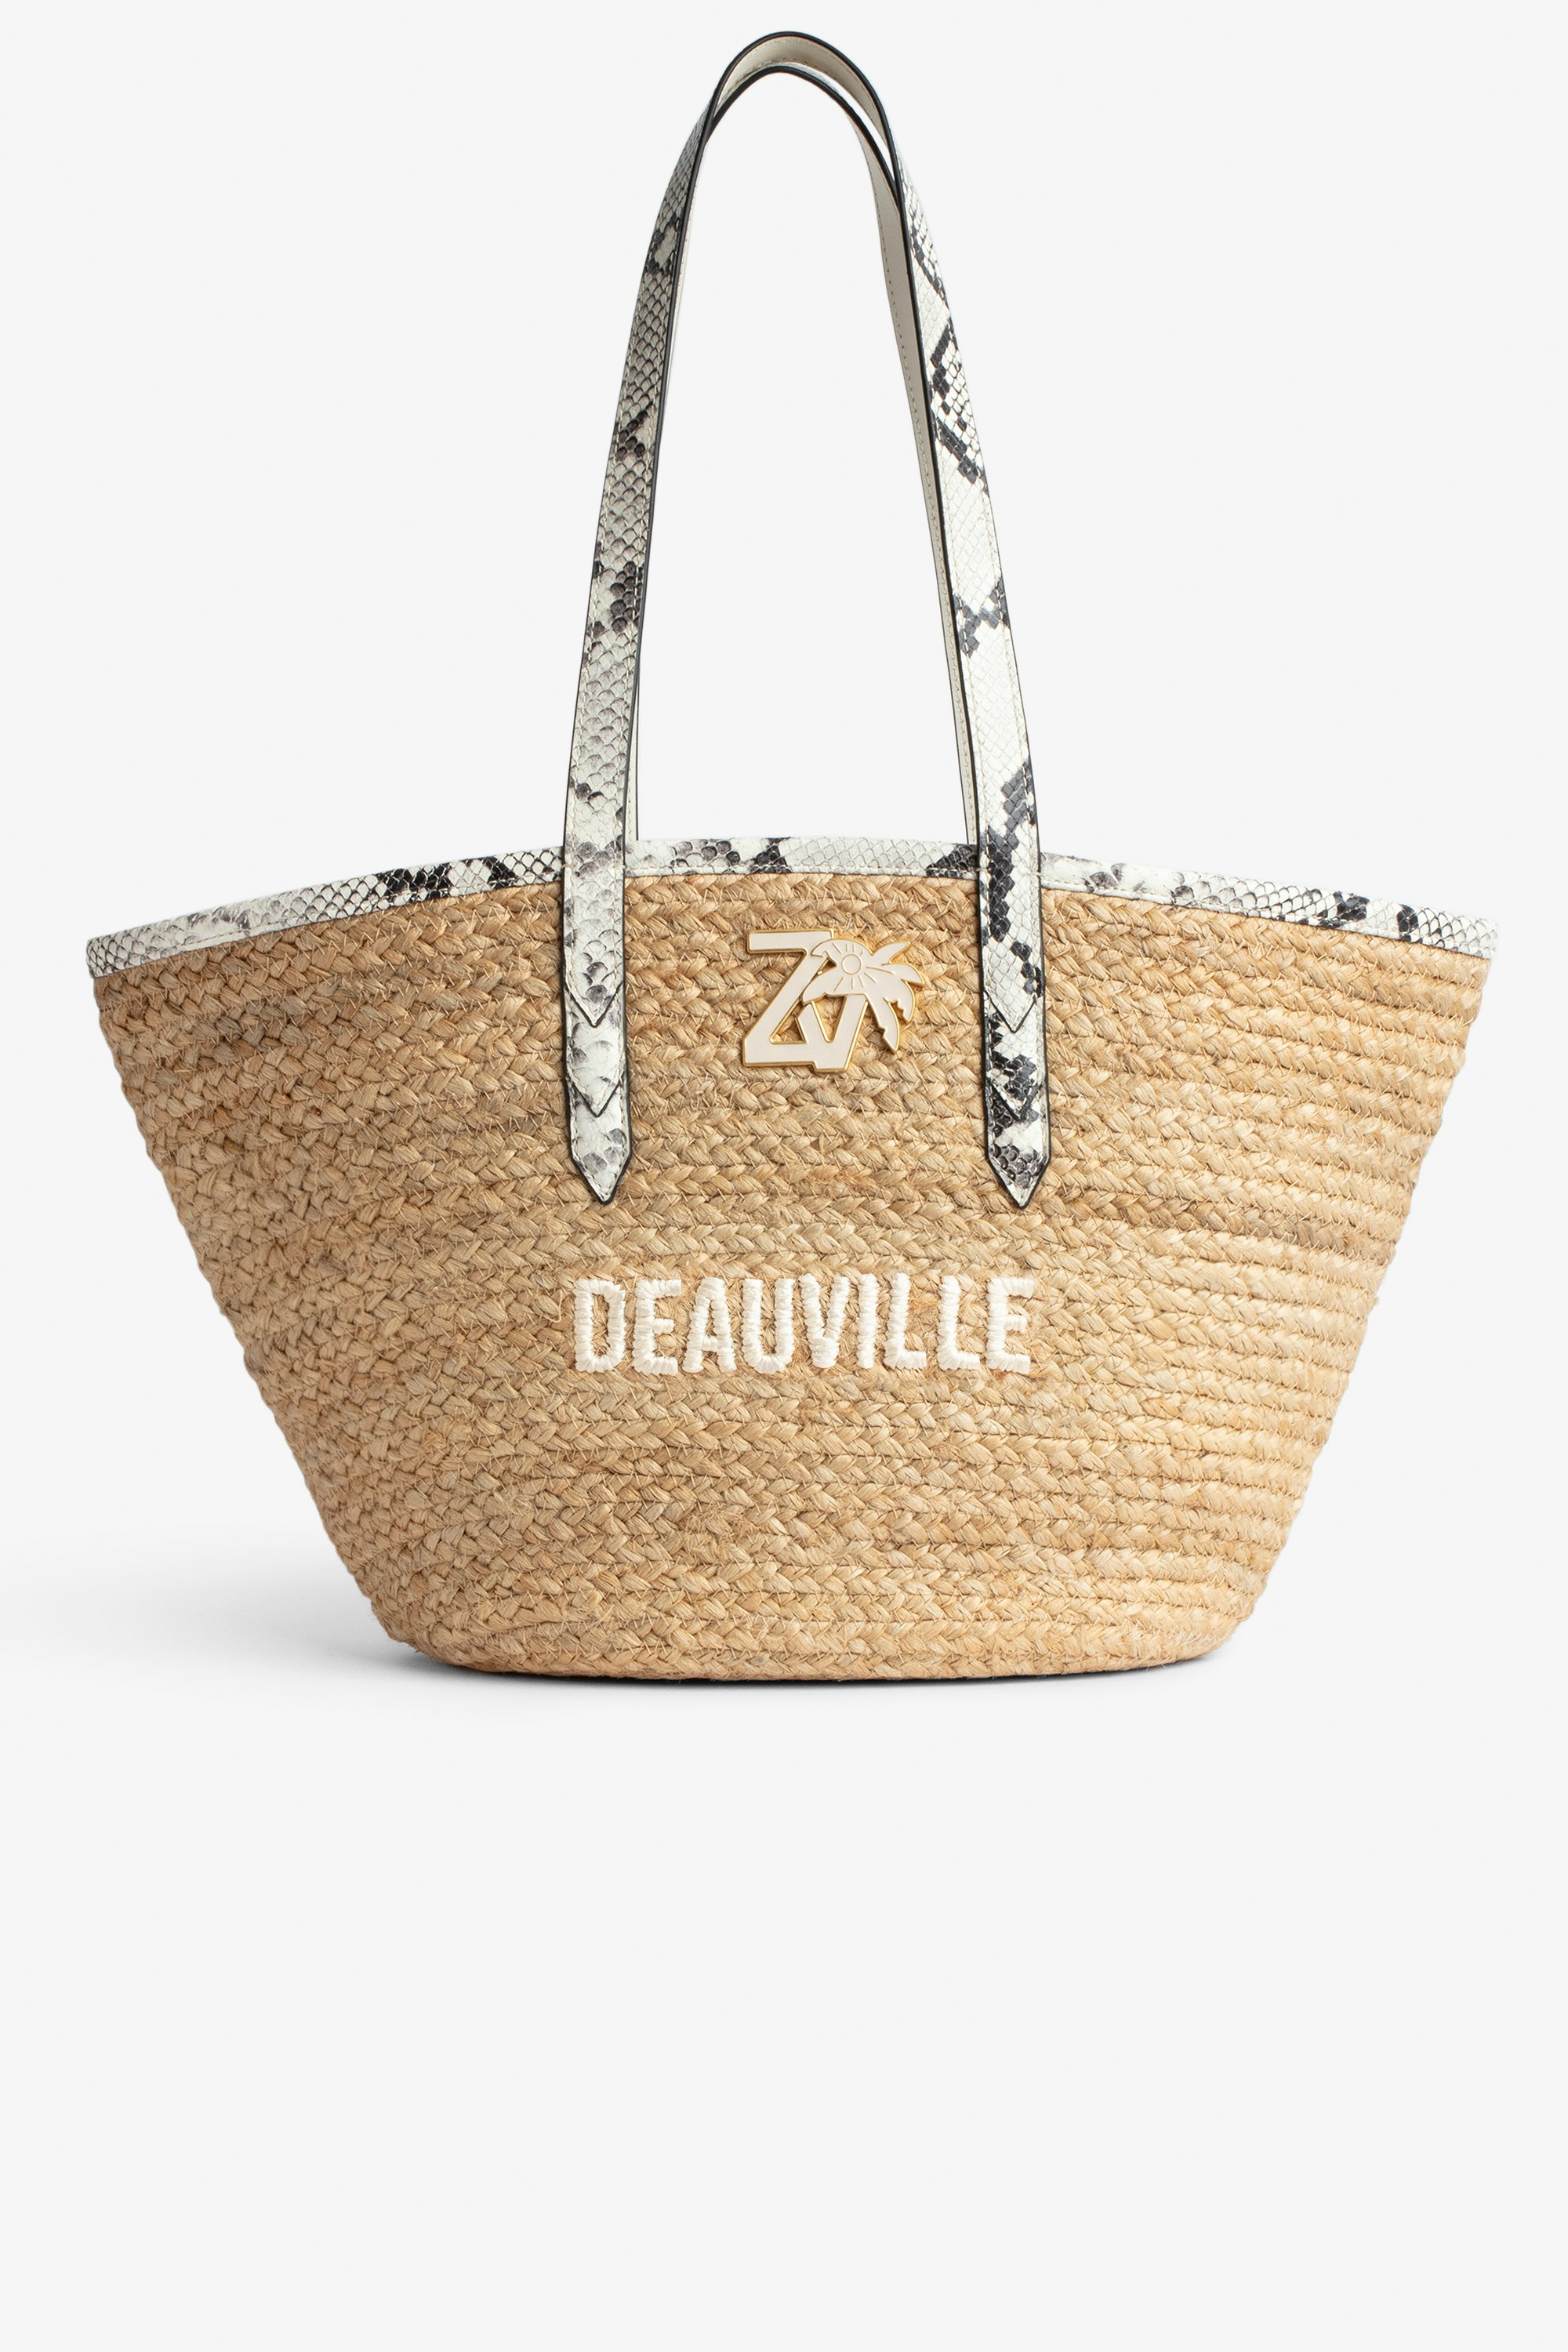 Le Beach Bag Women's straw bag with off-white snakeskin-effect leather handles, "Deauville" embroidery and ZV charm